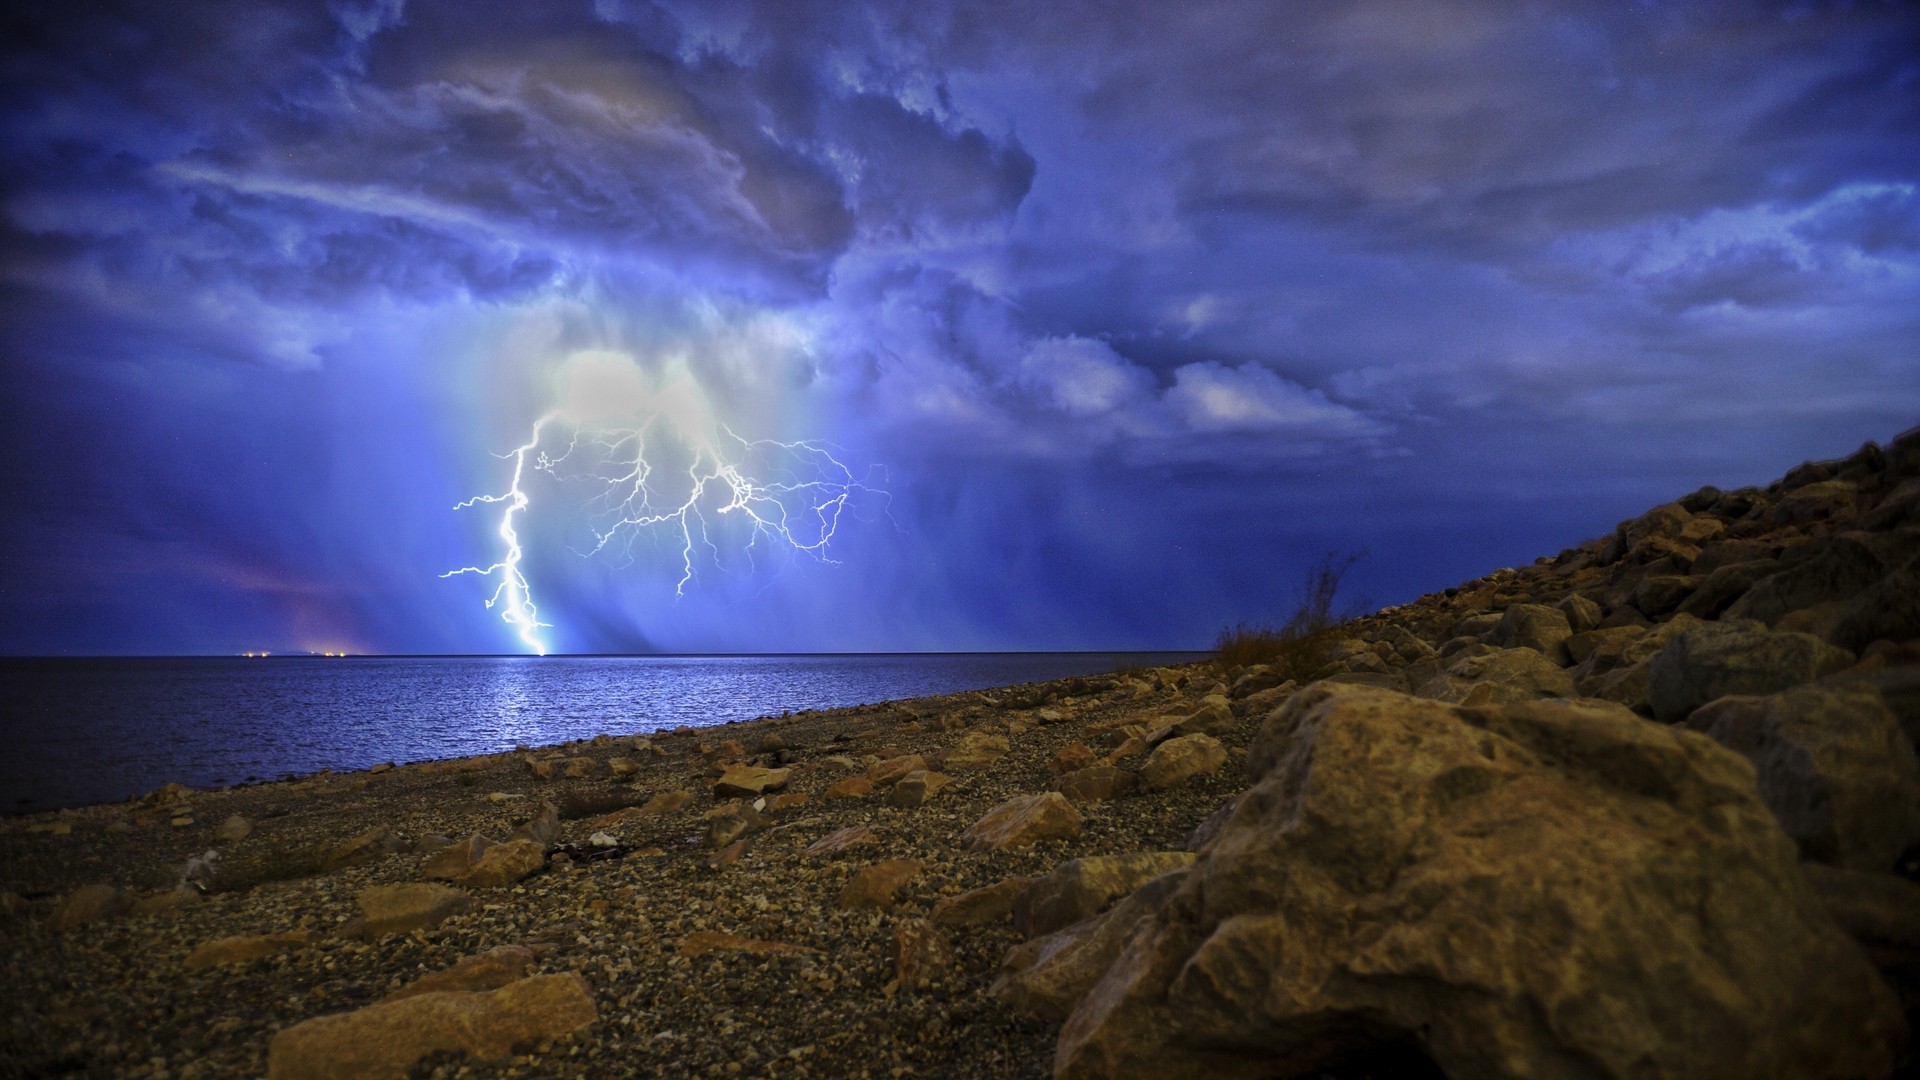 1920x1080 wallpapers: thunderstorm, storm, lake, cloudy, night (image)